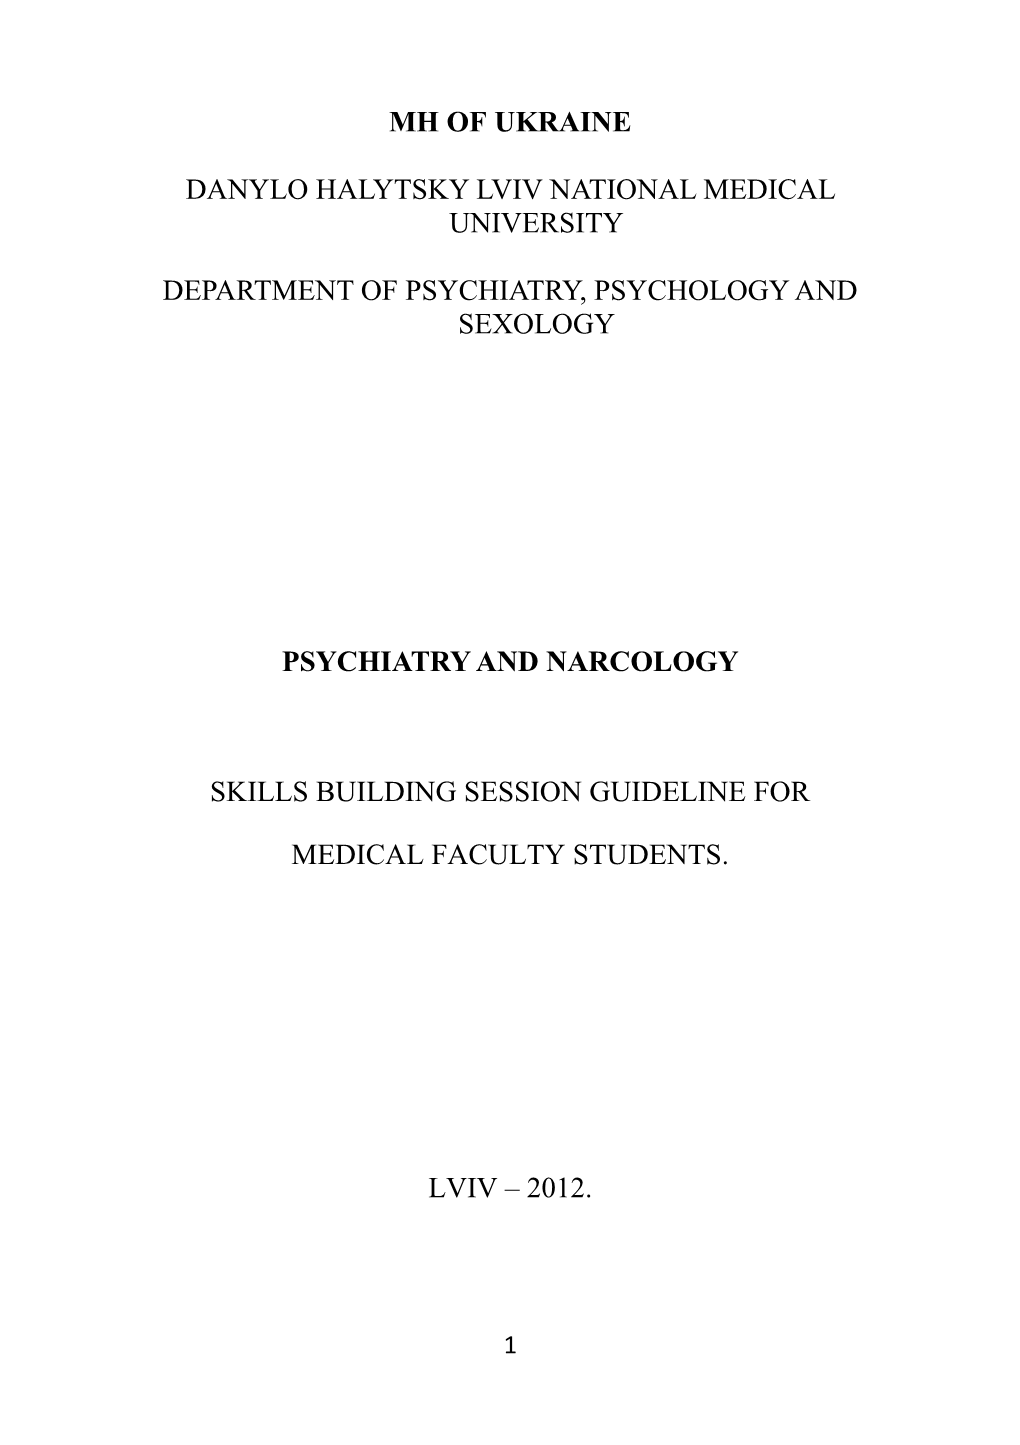 Department of Psychiatry, Psychology and Sexology